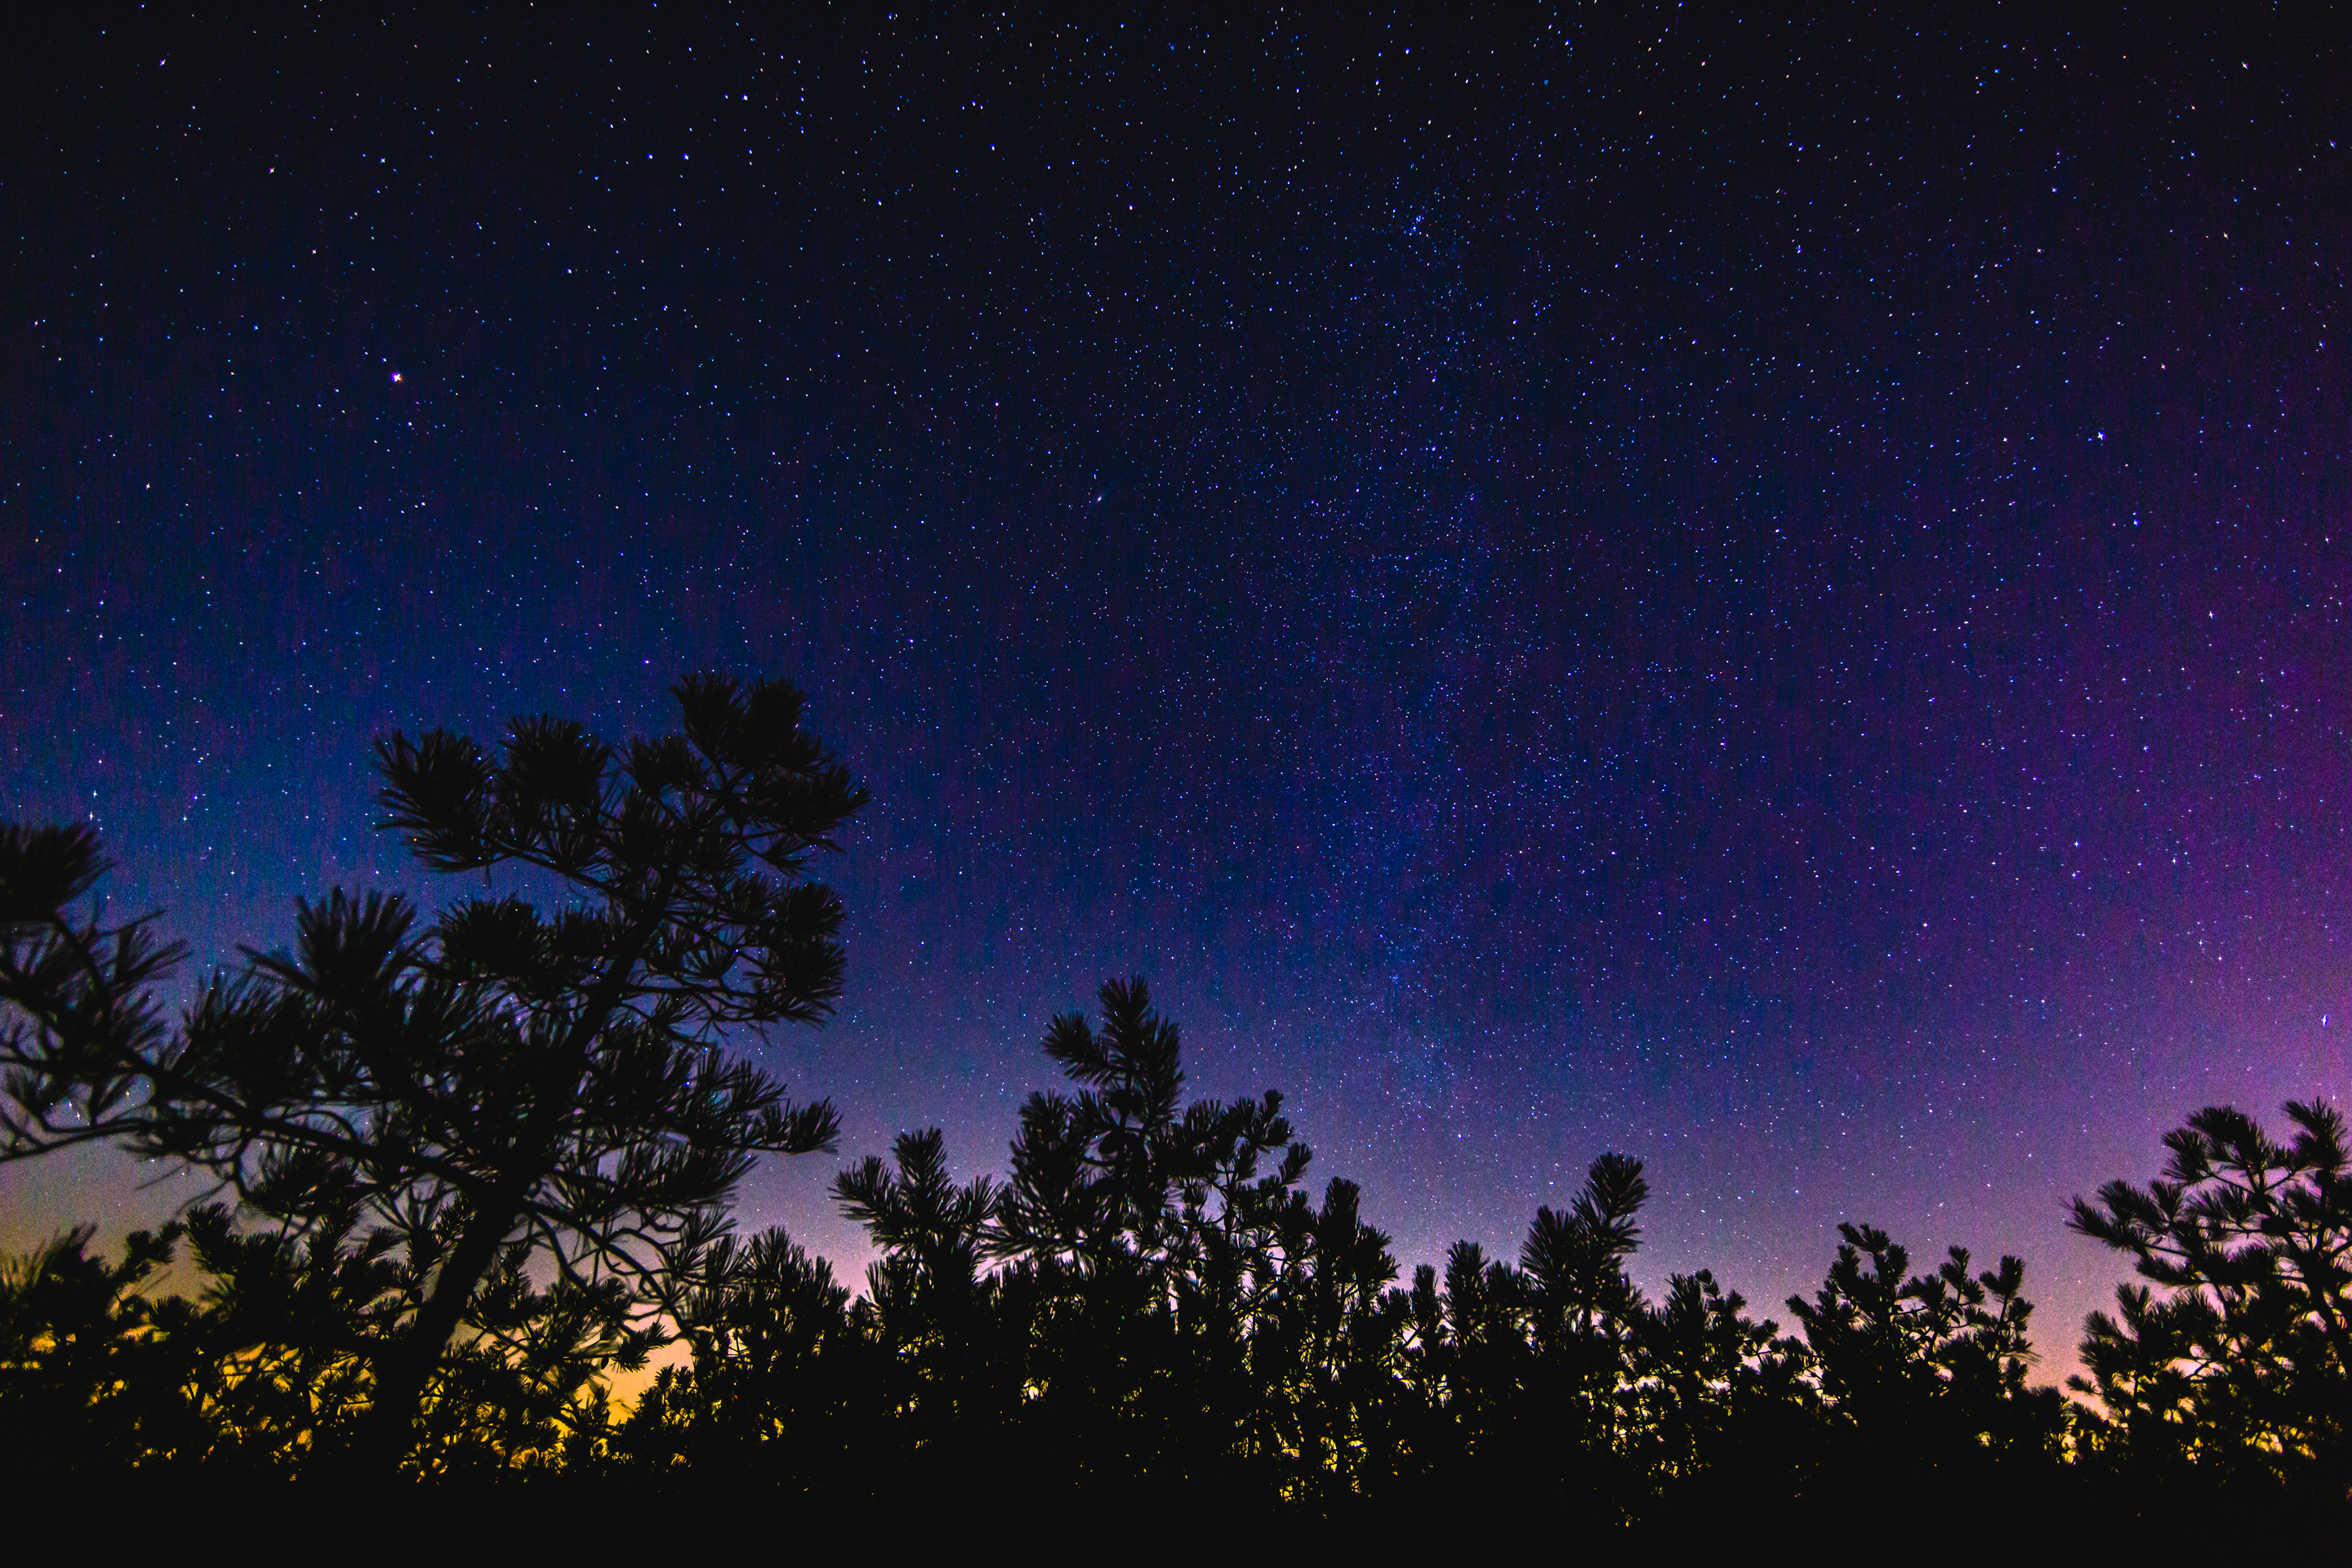 14mm wide angle astrophotography image of a star filled night sky captured atop the unique New Jersey Pinelands' pygmy pine trees.